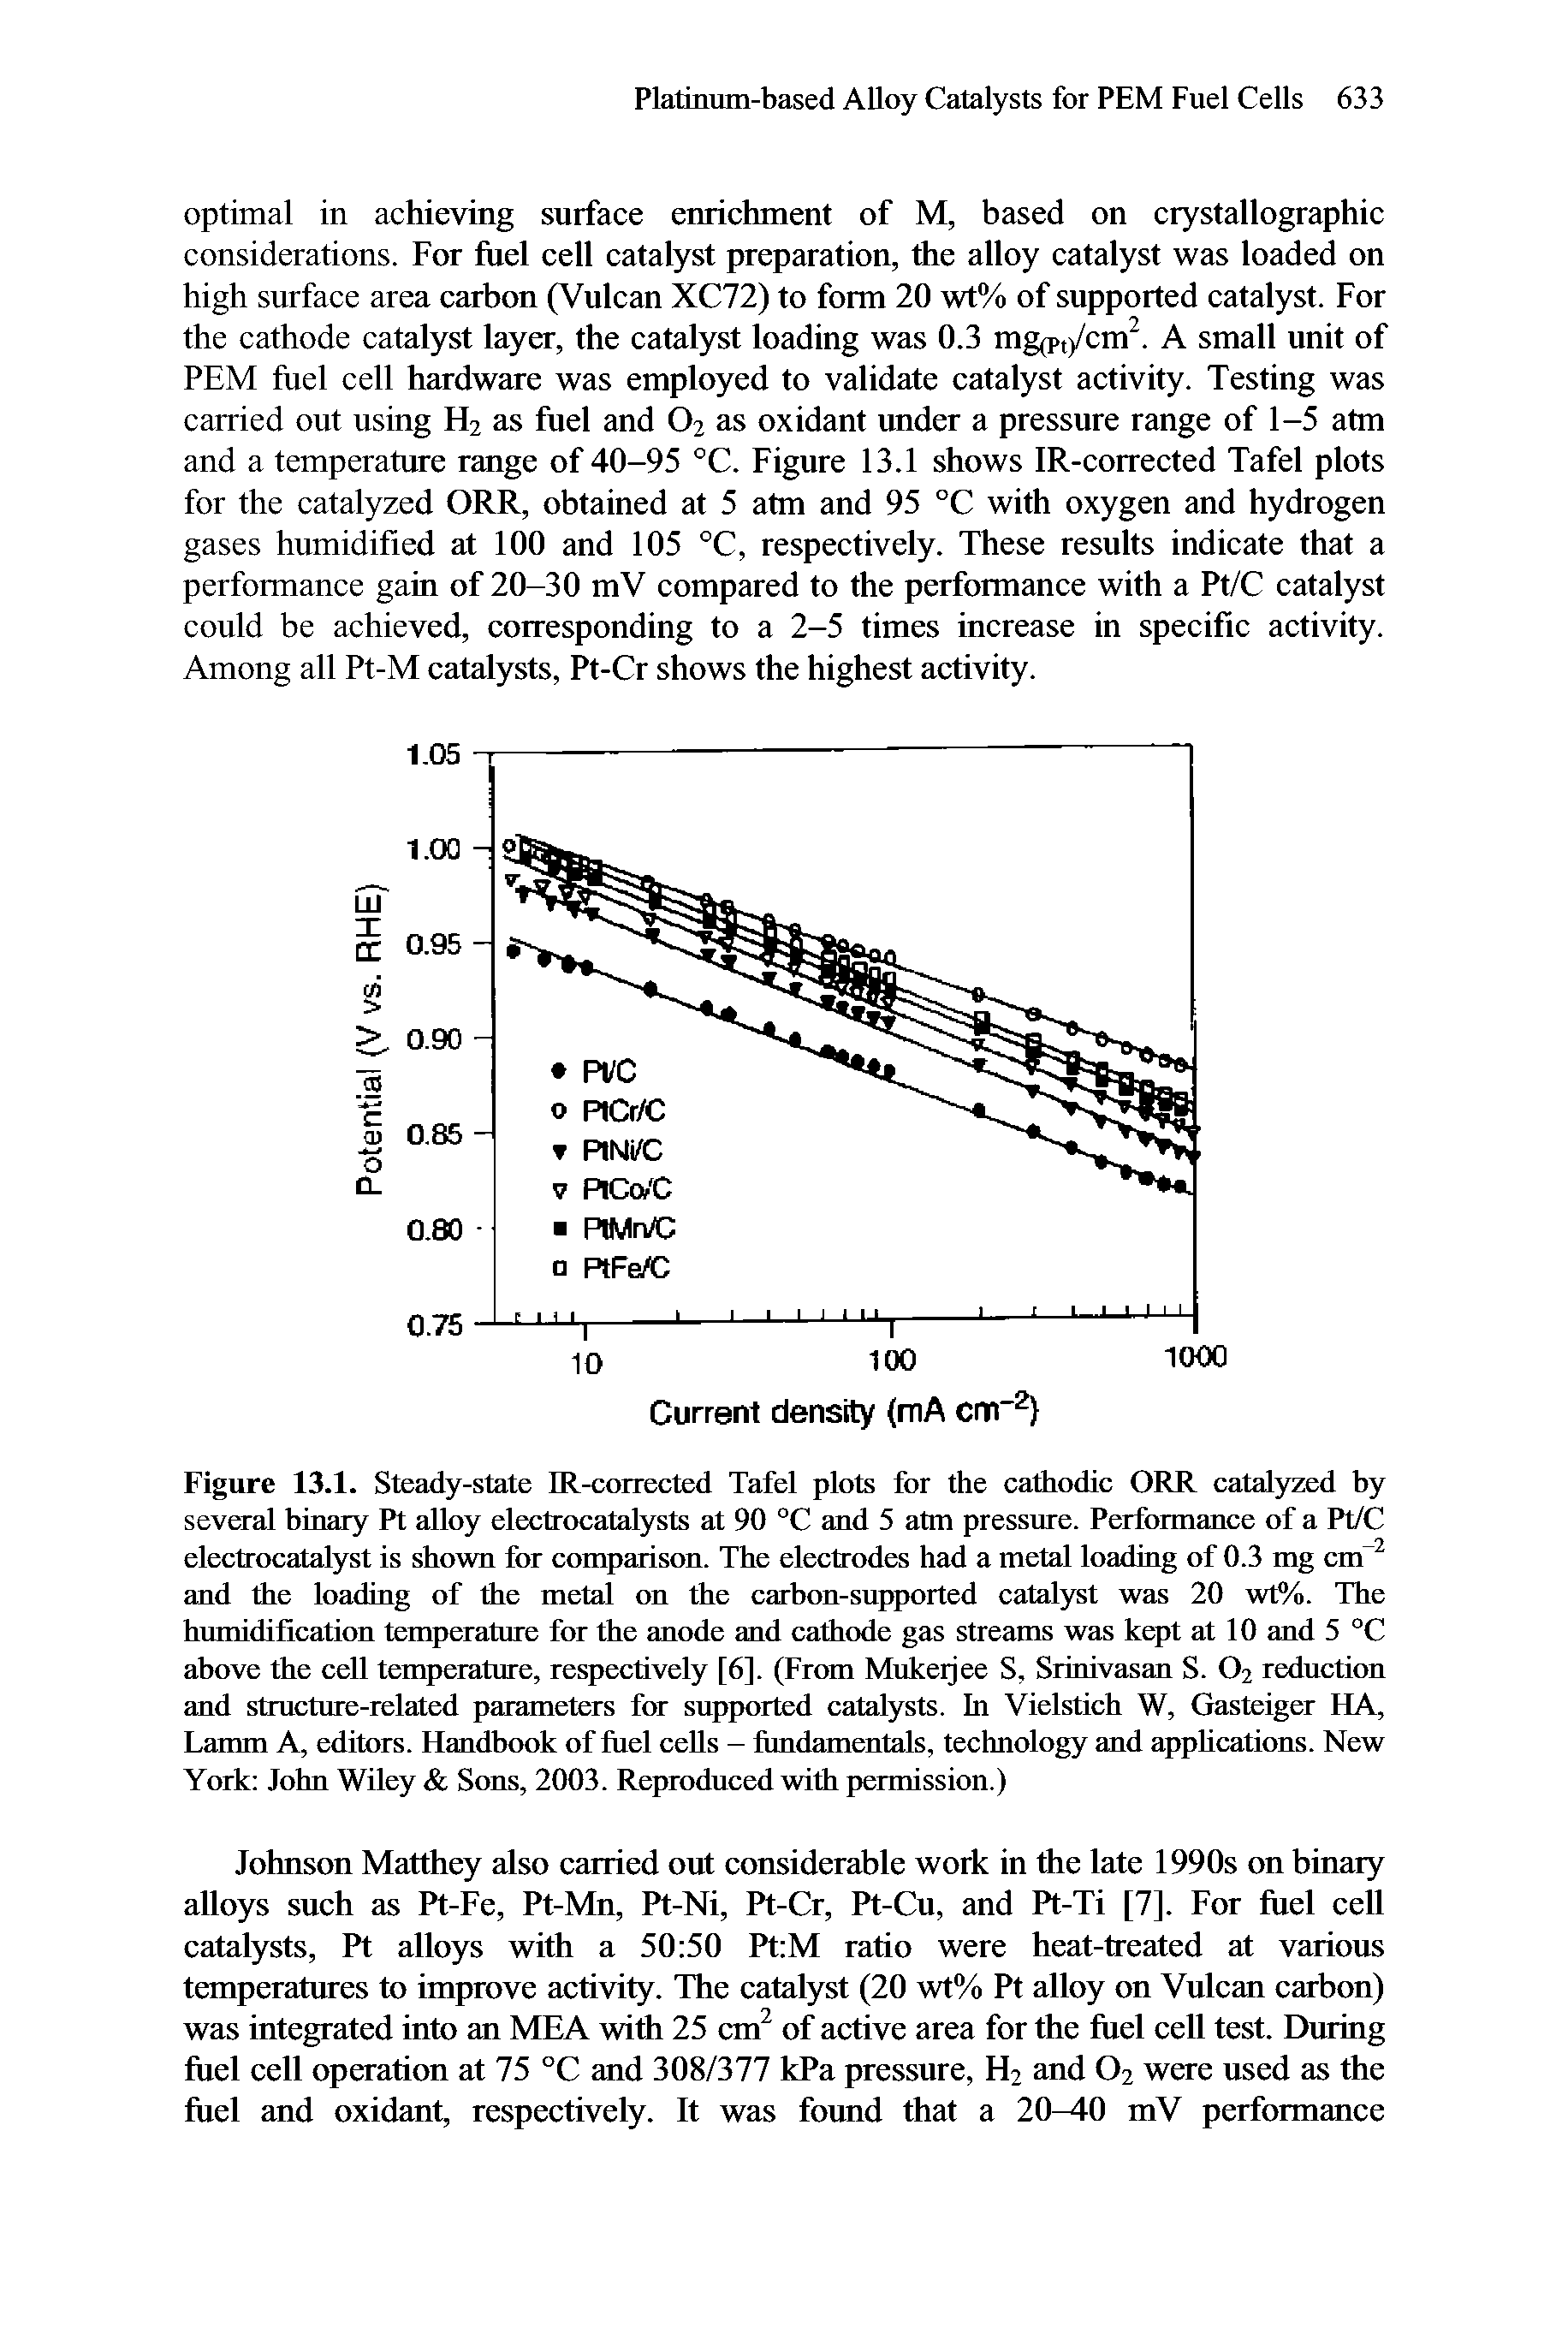 Figure 13.1. Steady-state IR-corrected Tafel plots for the cathodic ORR catalyzed by several binary Pt alloy electrocatalysts at 90 °C and 5 atm pressure. Performance of a Pt/C electrocatalyst is shown for comparison. The electrodes had a metal loading of 0.3 mg cm and the loading of the metal on the carbon-snpported catal5rst was 20 wt%. The humidification temperature for the anode and cathode gas streams was kept at 10 and 5 °C above the cell temperature, respectively [6]. (From Mukeijee S, Srinivasan S. O2 reduction and structure-related parameters for supported catalysts. In Vielstich W, Gasteiger HA, Lamm A, editors. Handbook of fuel cells - fundamentals, technology and appheations. New York John Wiley Sons, 2003. Reproduced with permission.)...